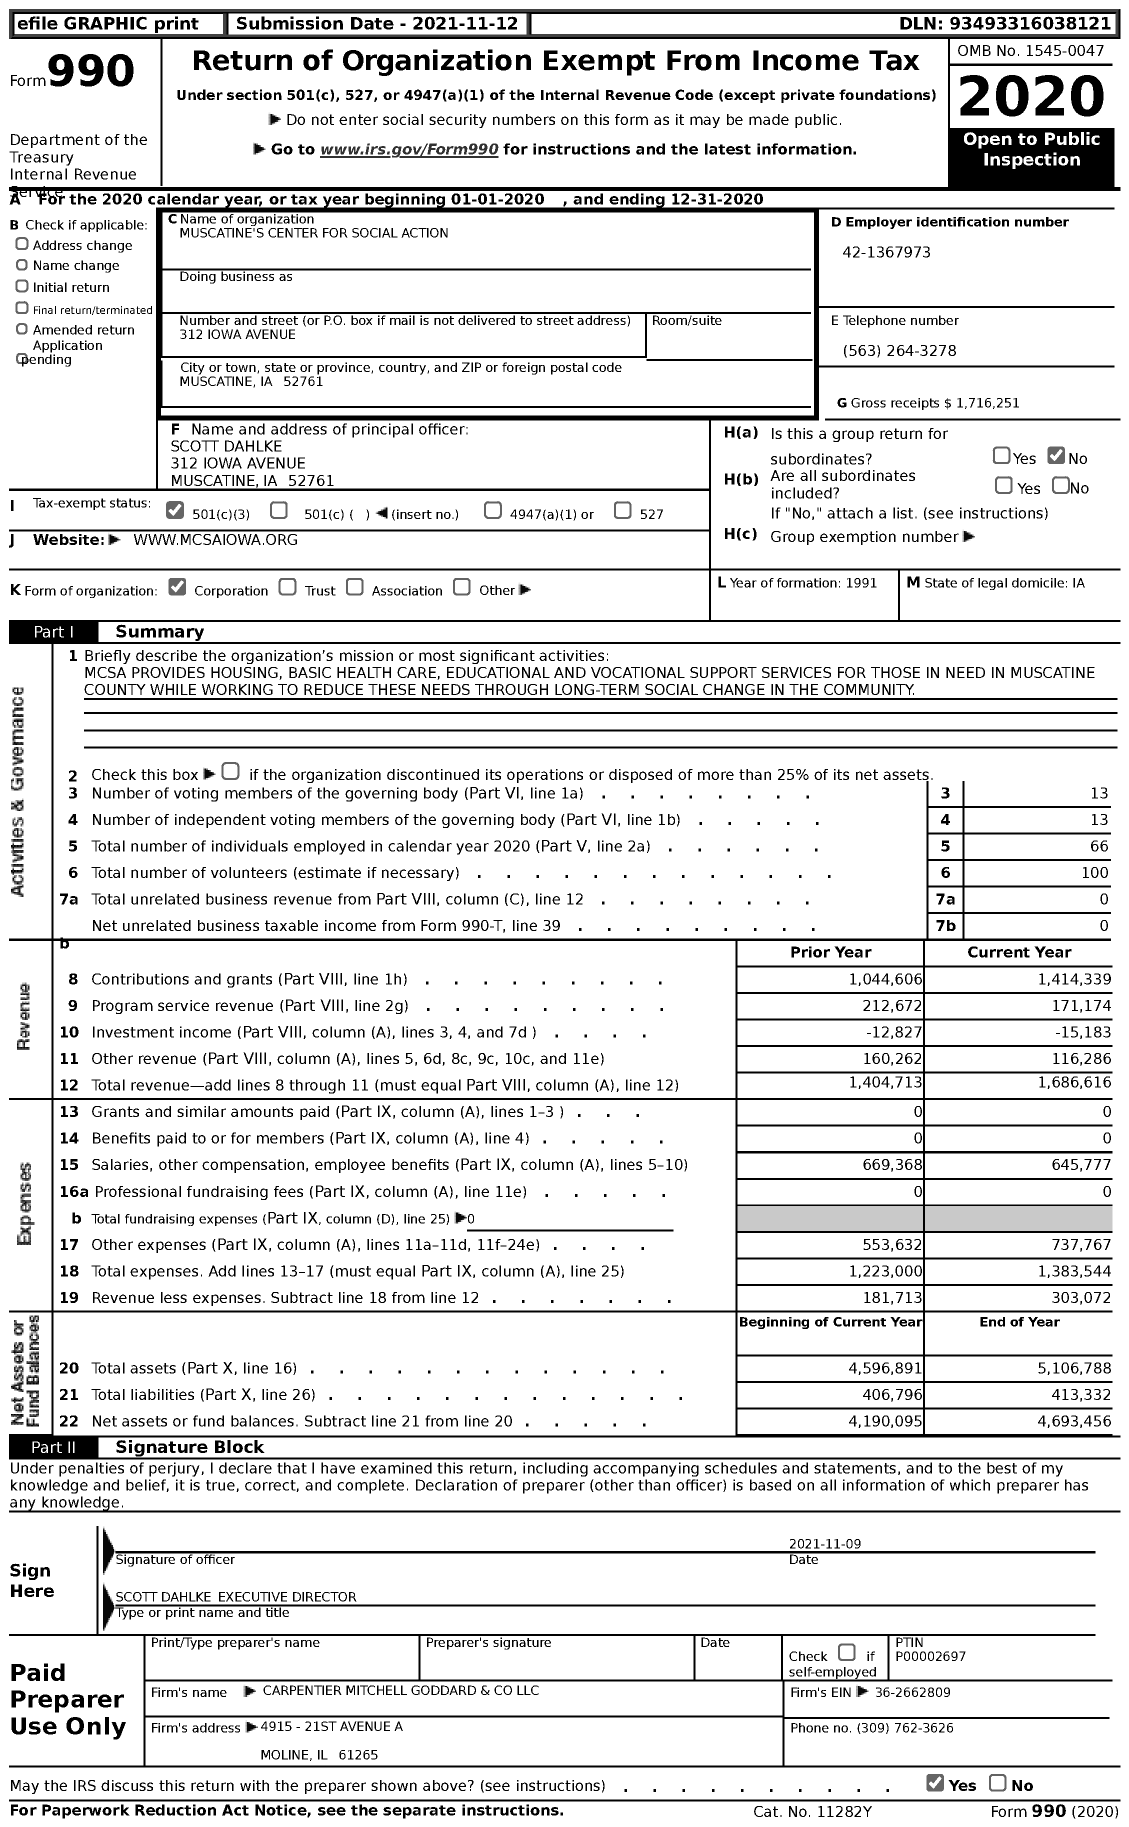 Image of first page of 2020 Form 990 for Muscatine's Center for Social Action